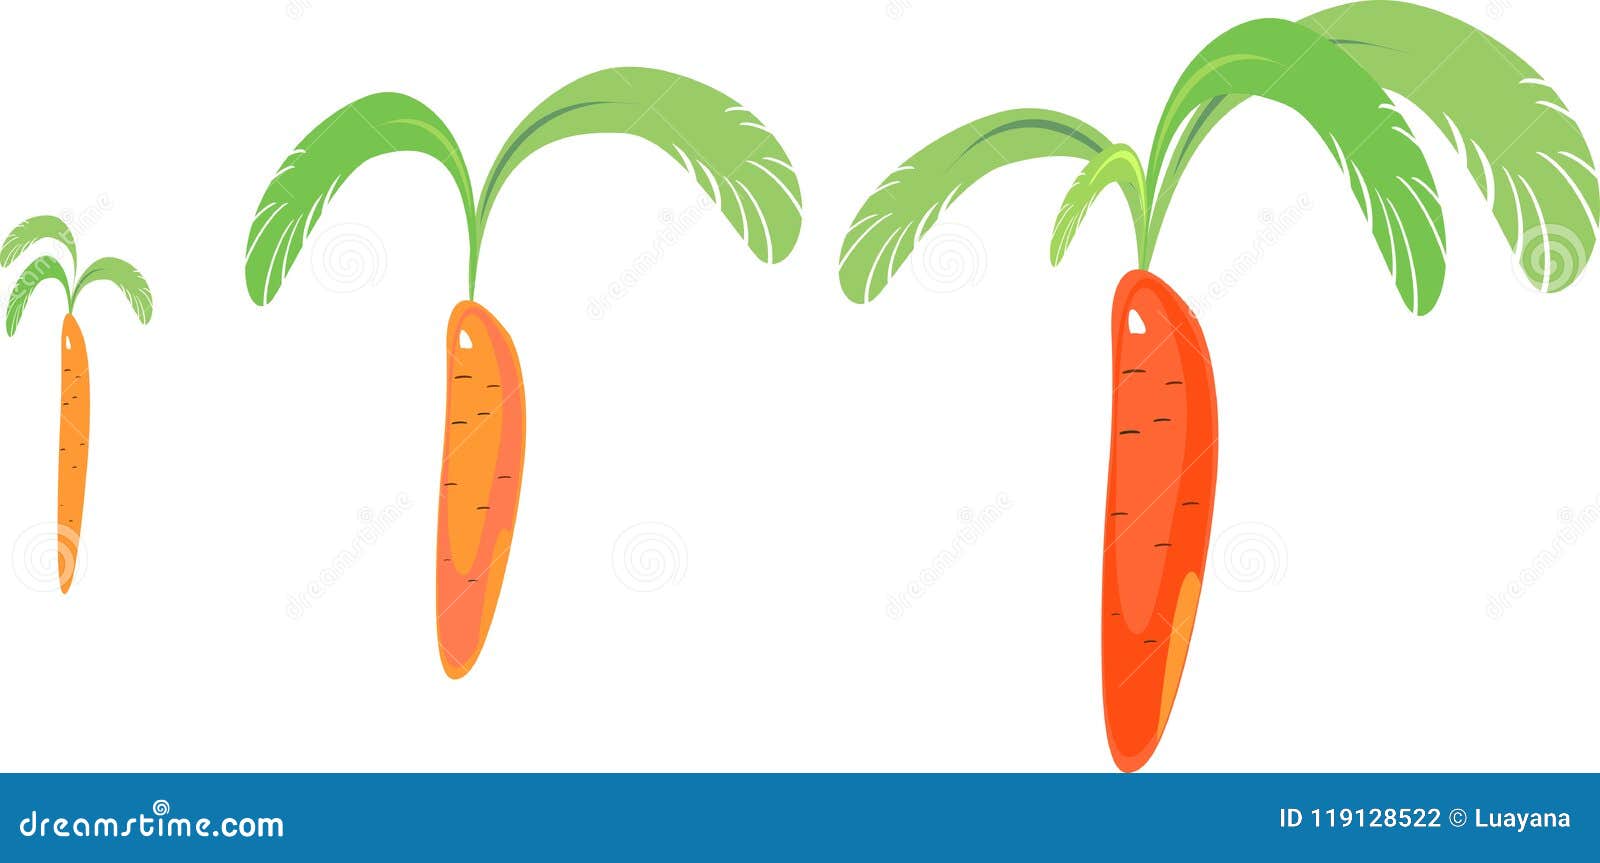 Stages of Growth of Carrots Stock Vector - Illustration of life, change ...